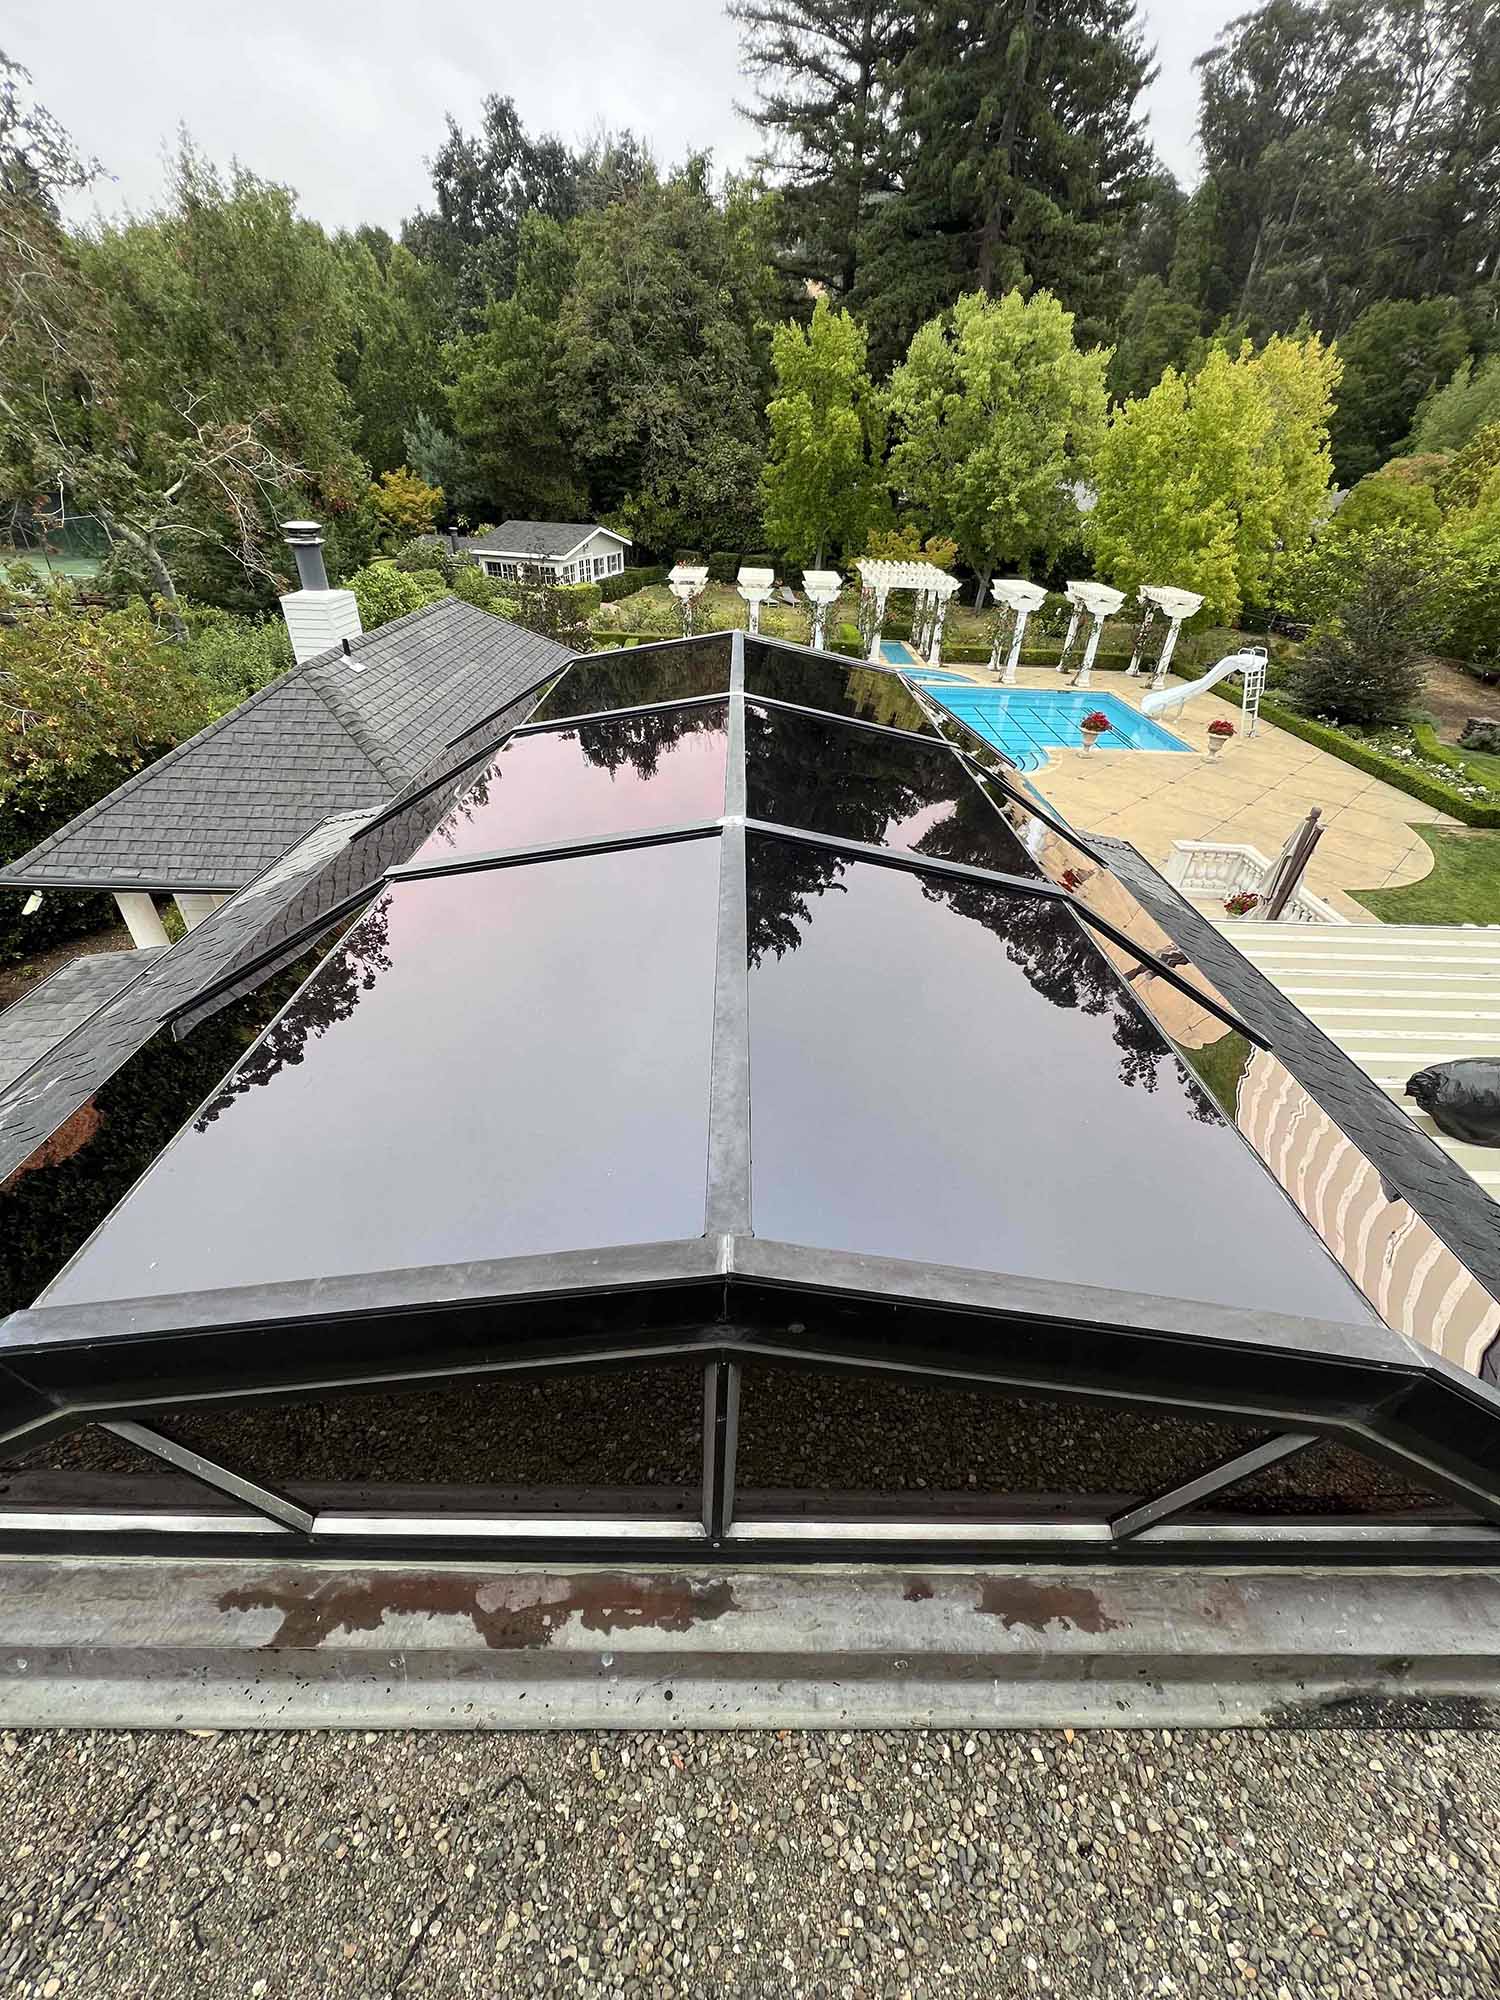 Exterior Window Film for Skylights in a San Rafael, CA Home, installed by ClimatePro. Get a free estimate in the San Francisco Bay Area today.